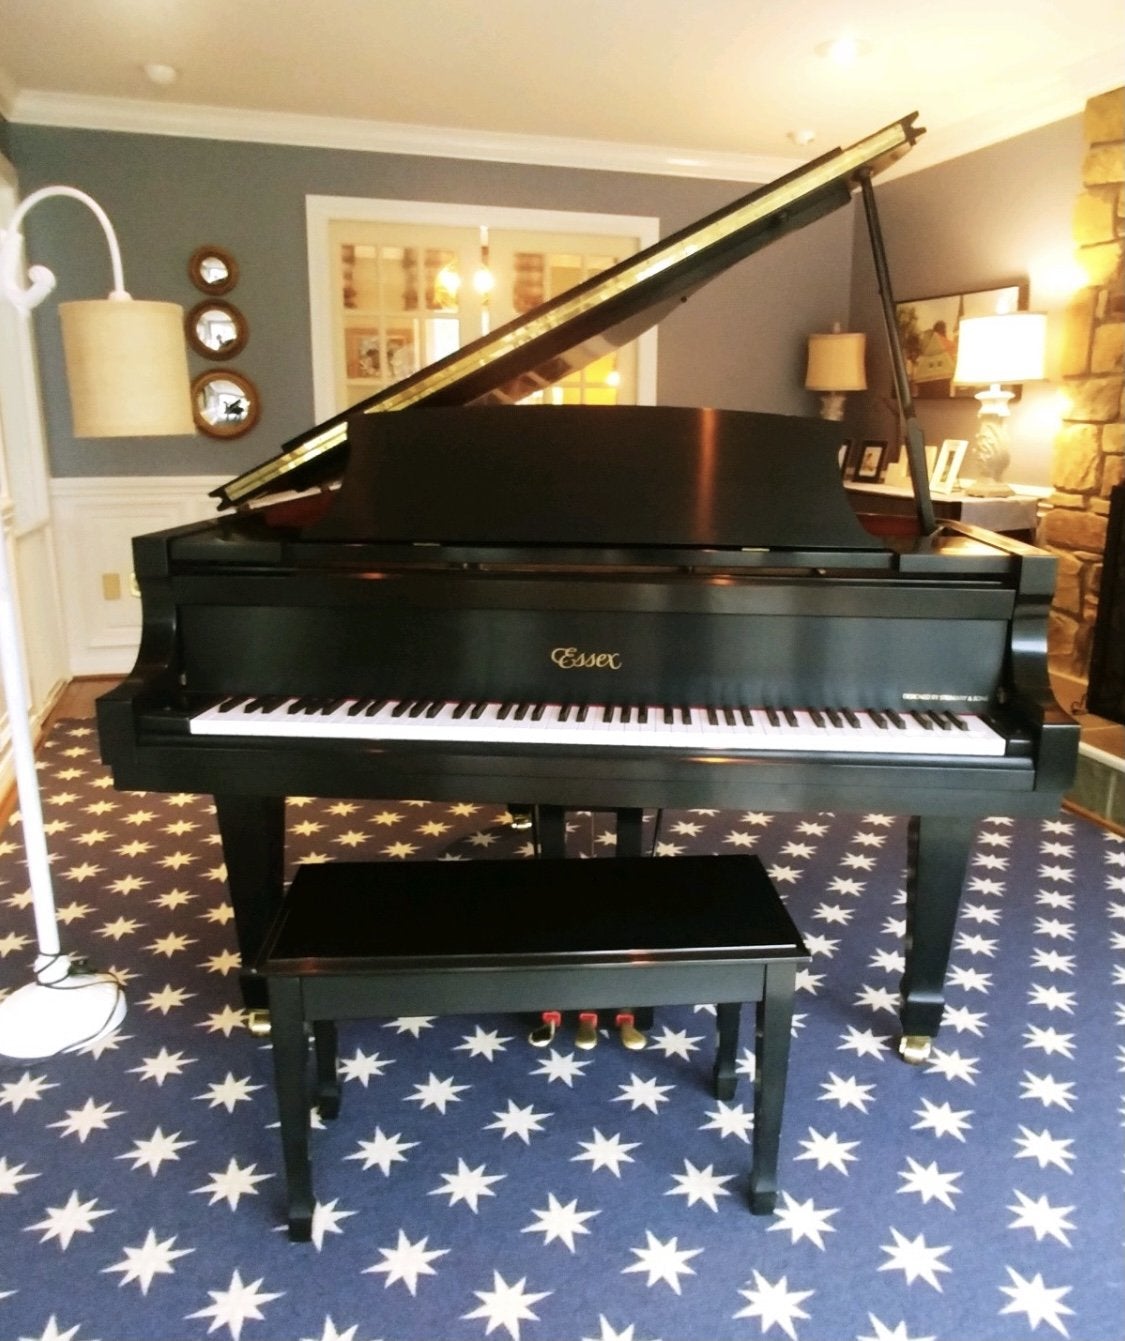 Essex EGP-161 Baby Grand Piano Purchased New In 2007